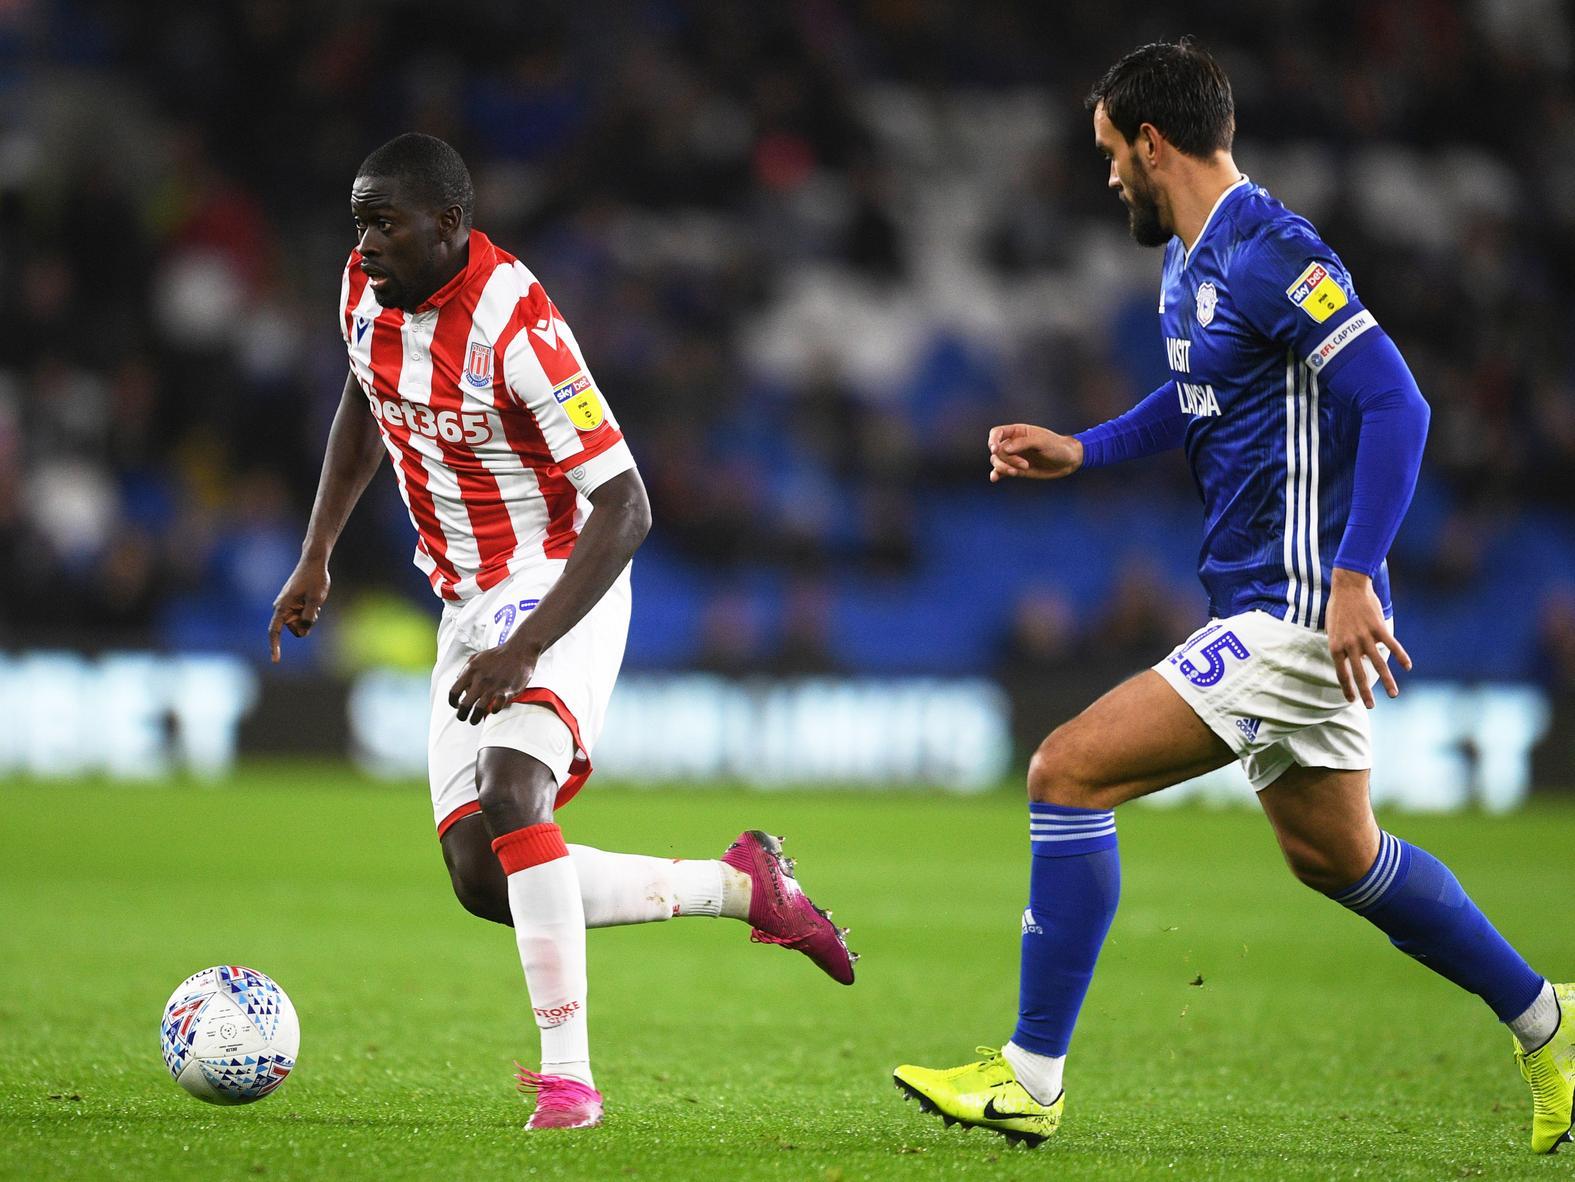 Stoke City manager Michael O'Neill has been tasked with slashing the club's enormous 50m wage bill, and will start the process by selling midfielder Badou Ndiaye. (Telegraph)